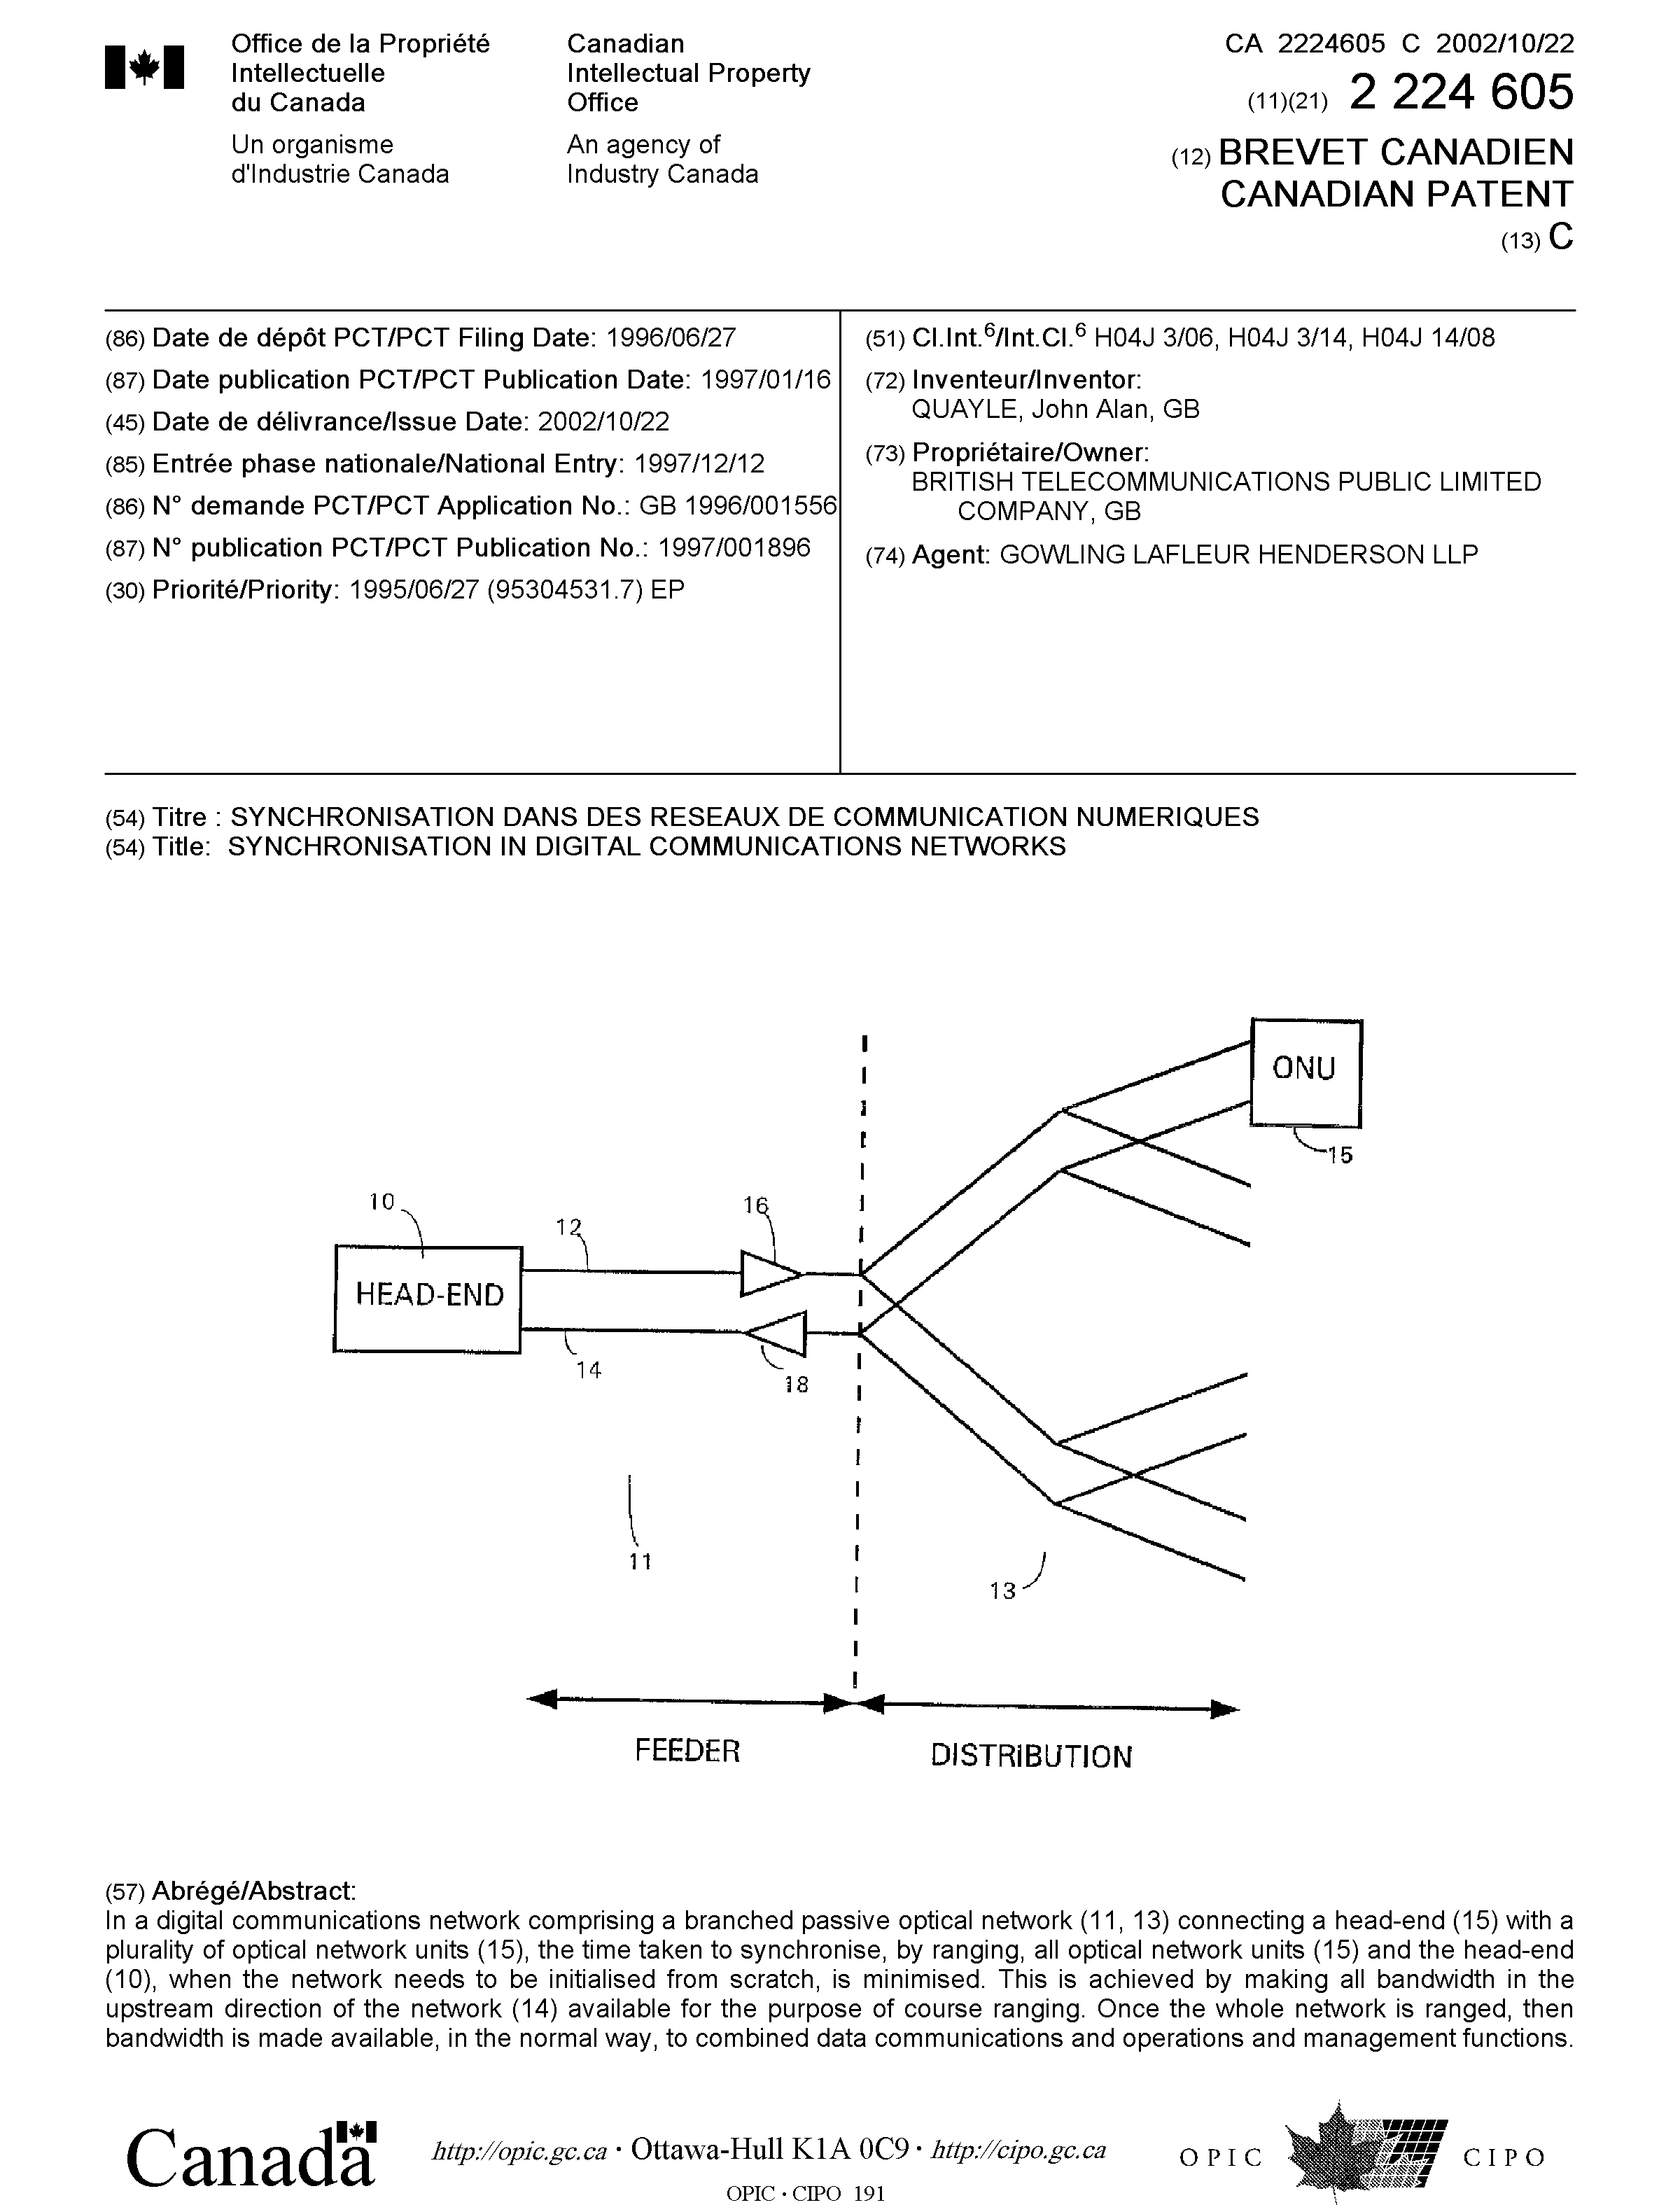 Canadian Patent Document 2224605. Cover Page 20020919. Image 1 of 1